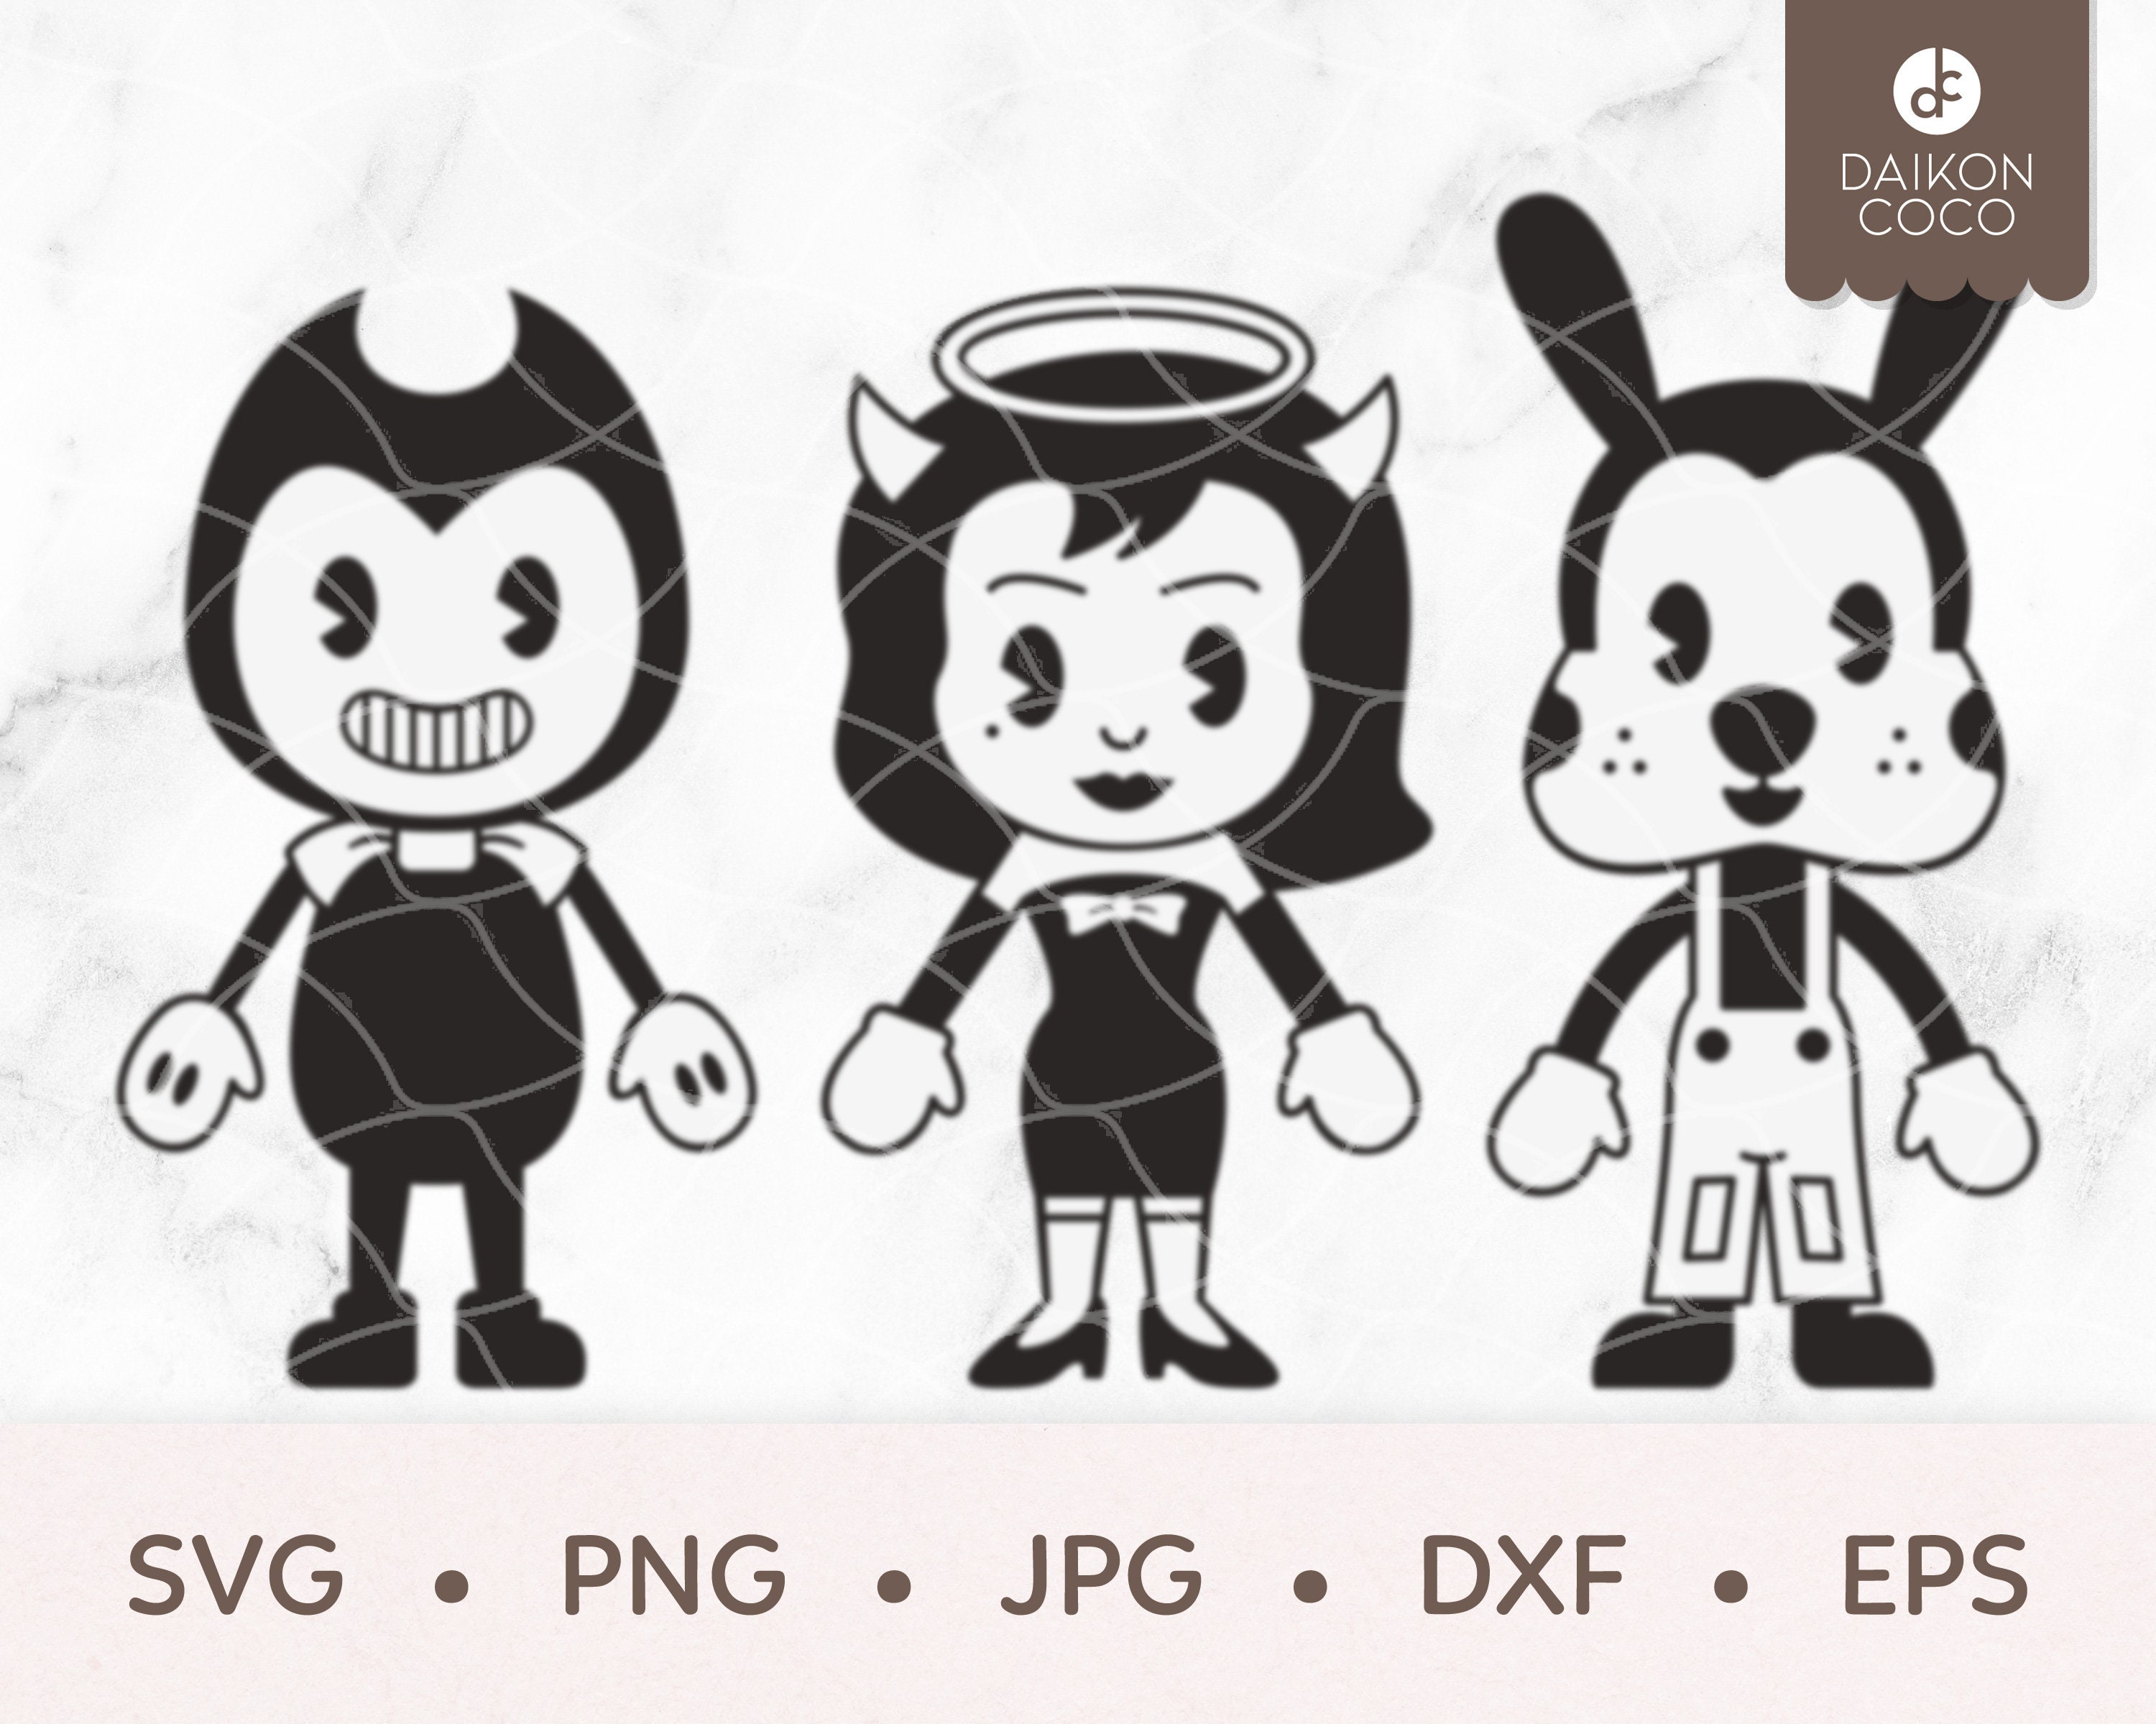 Bendy and the Ink Machine SVG DXF EPS Png Pdf. Bendy -  Israel